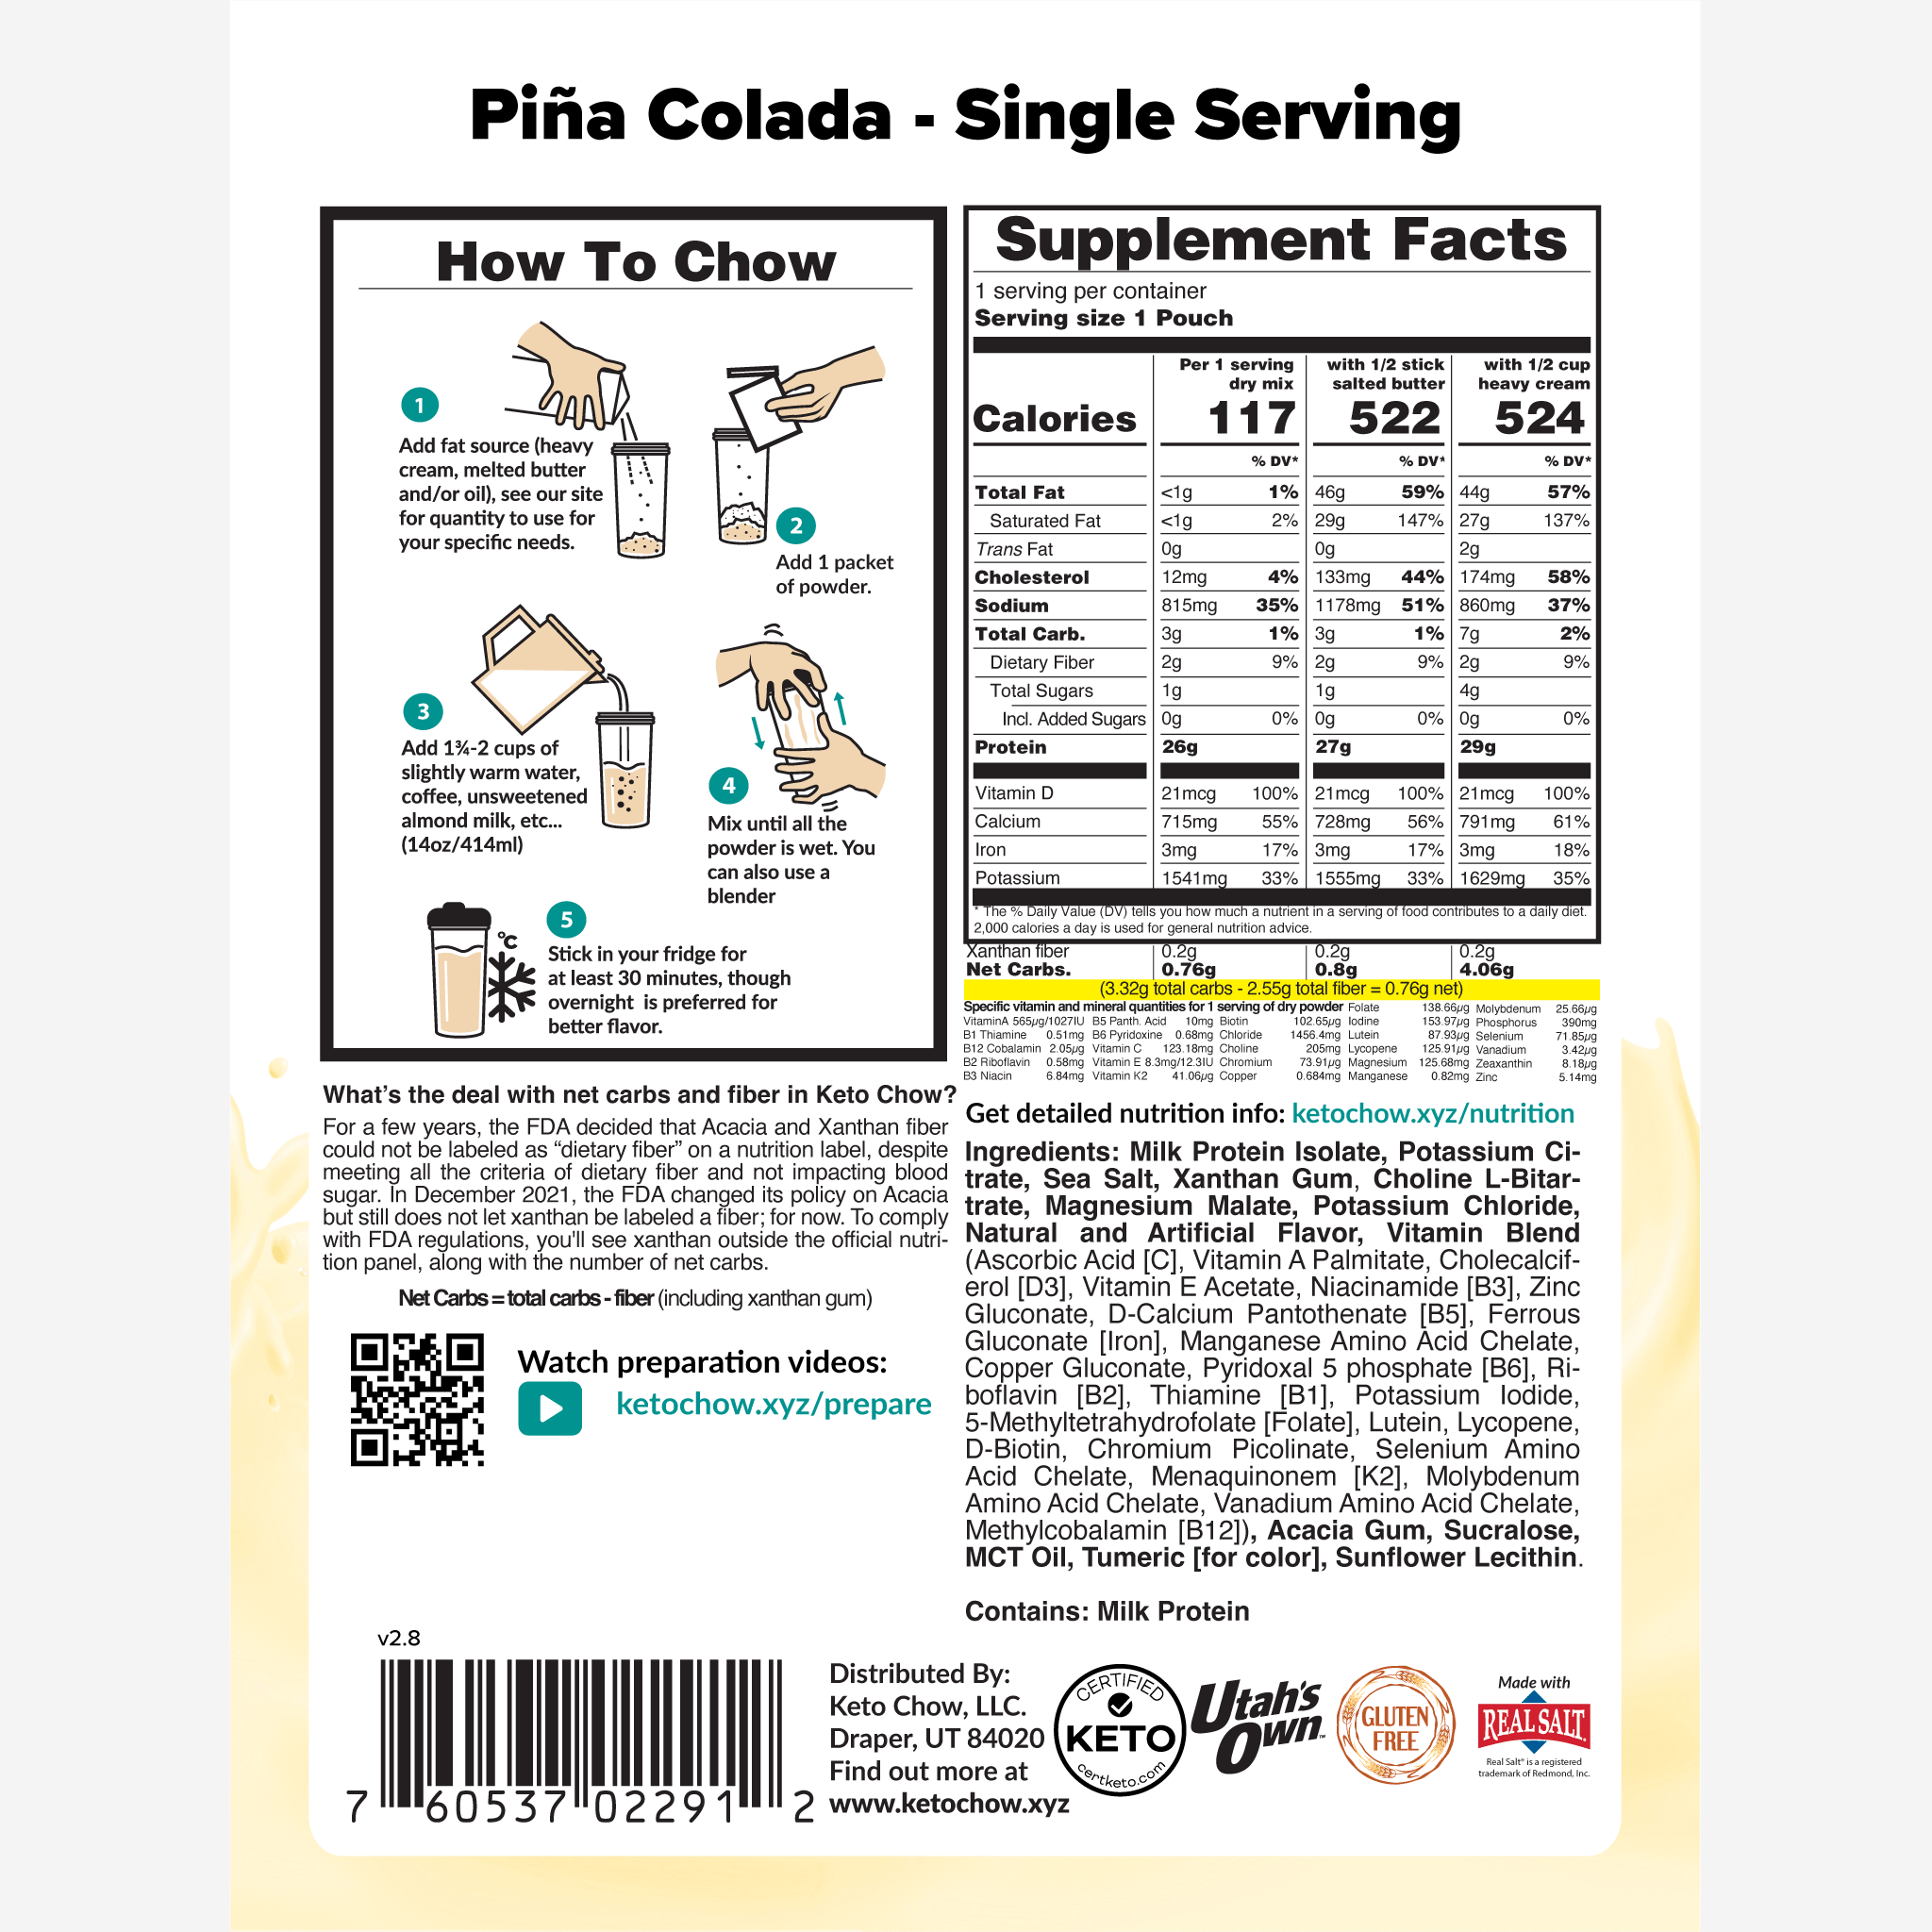 Pina Colada single serving package back